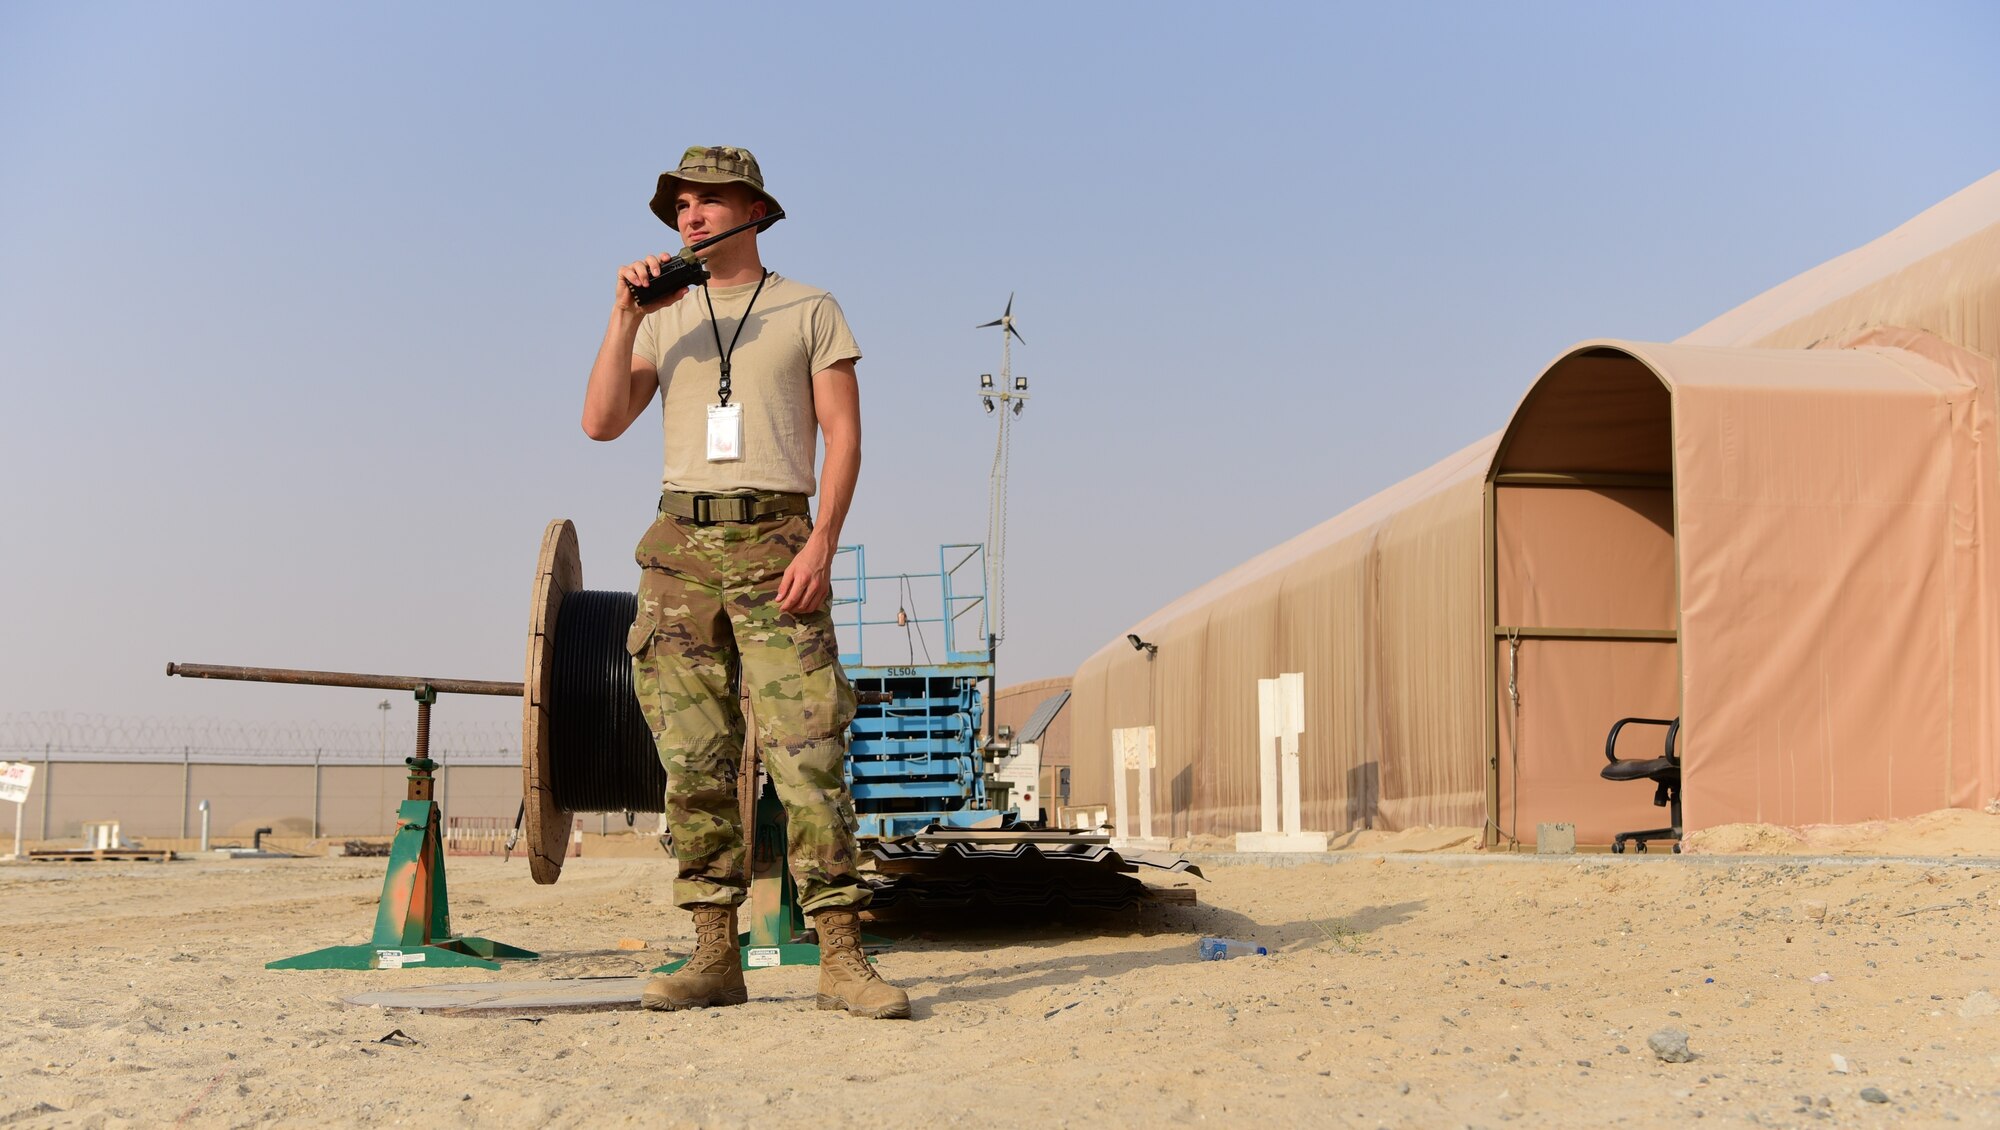 Senior Airman Joshua Morgan, 386th Expeditionary Civil Engineer Squadron force protection specialist, radios to other members of his team Oct. 18, 2018, at an undisclosed location in Southwest Asia. Force protection Airmen ensure security in the deployed area of responsibility by augmenting security forces and monitoring contracted workers on and off their respective bases. (U.S. Air Force photo by Staff Sgt. Christopher Stoltz)